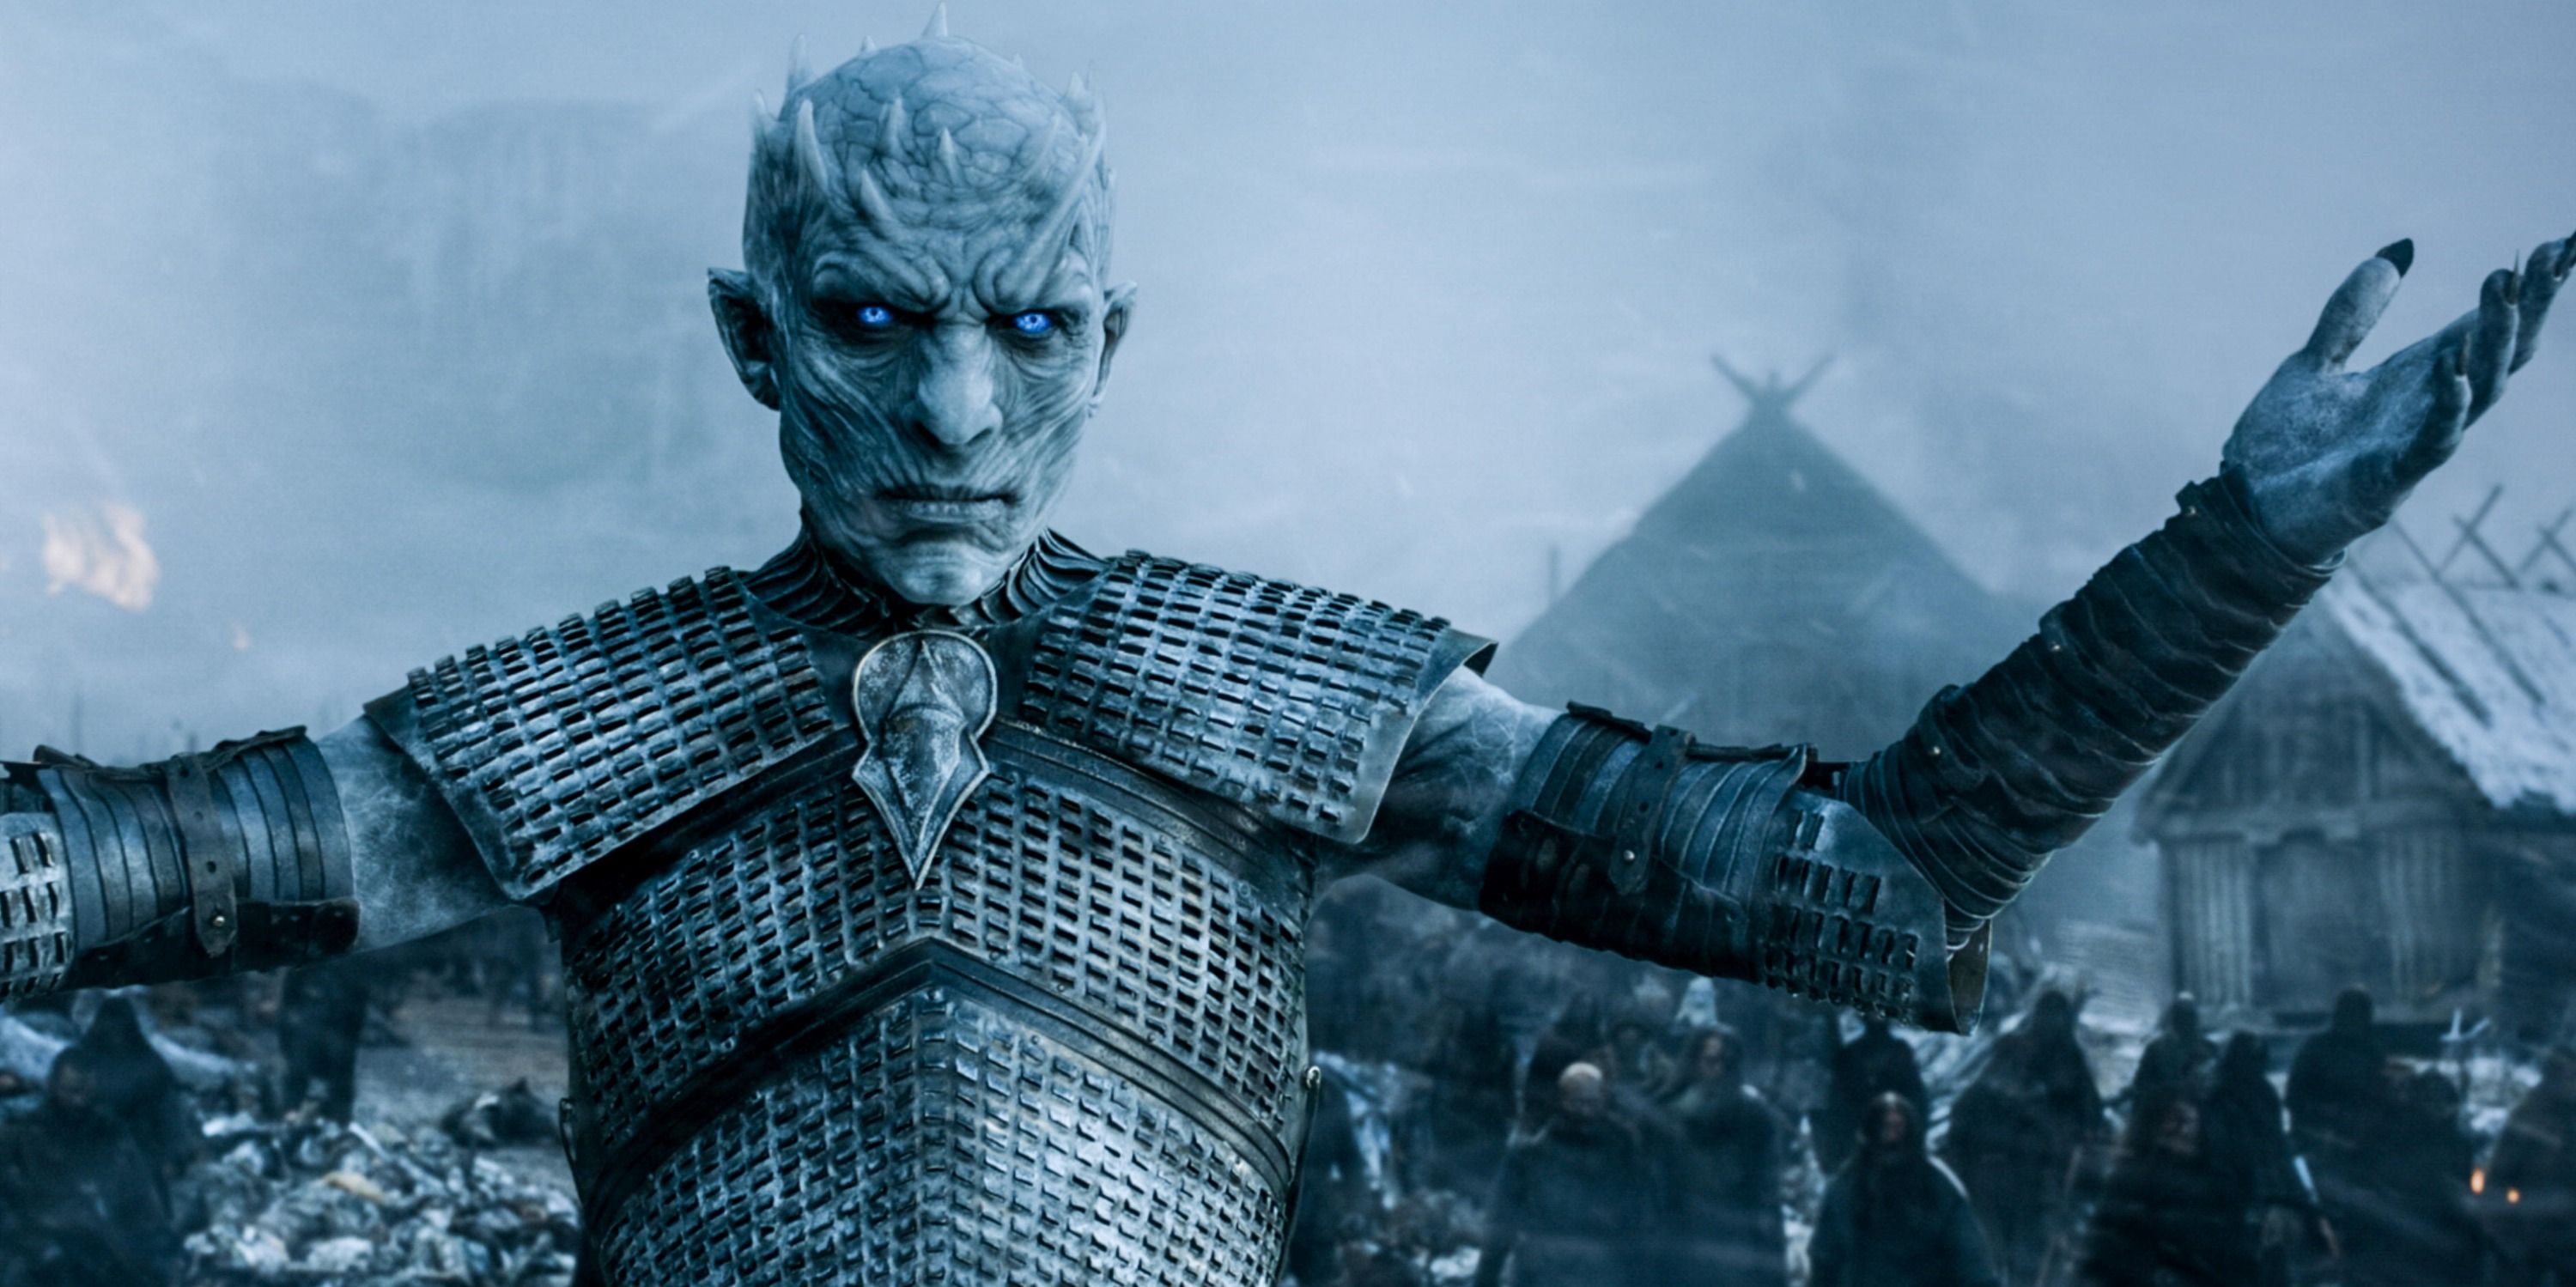 The Night King raises his arms in GOT